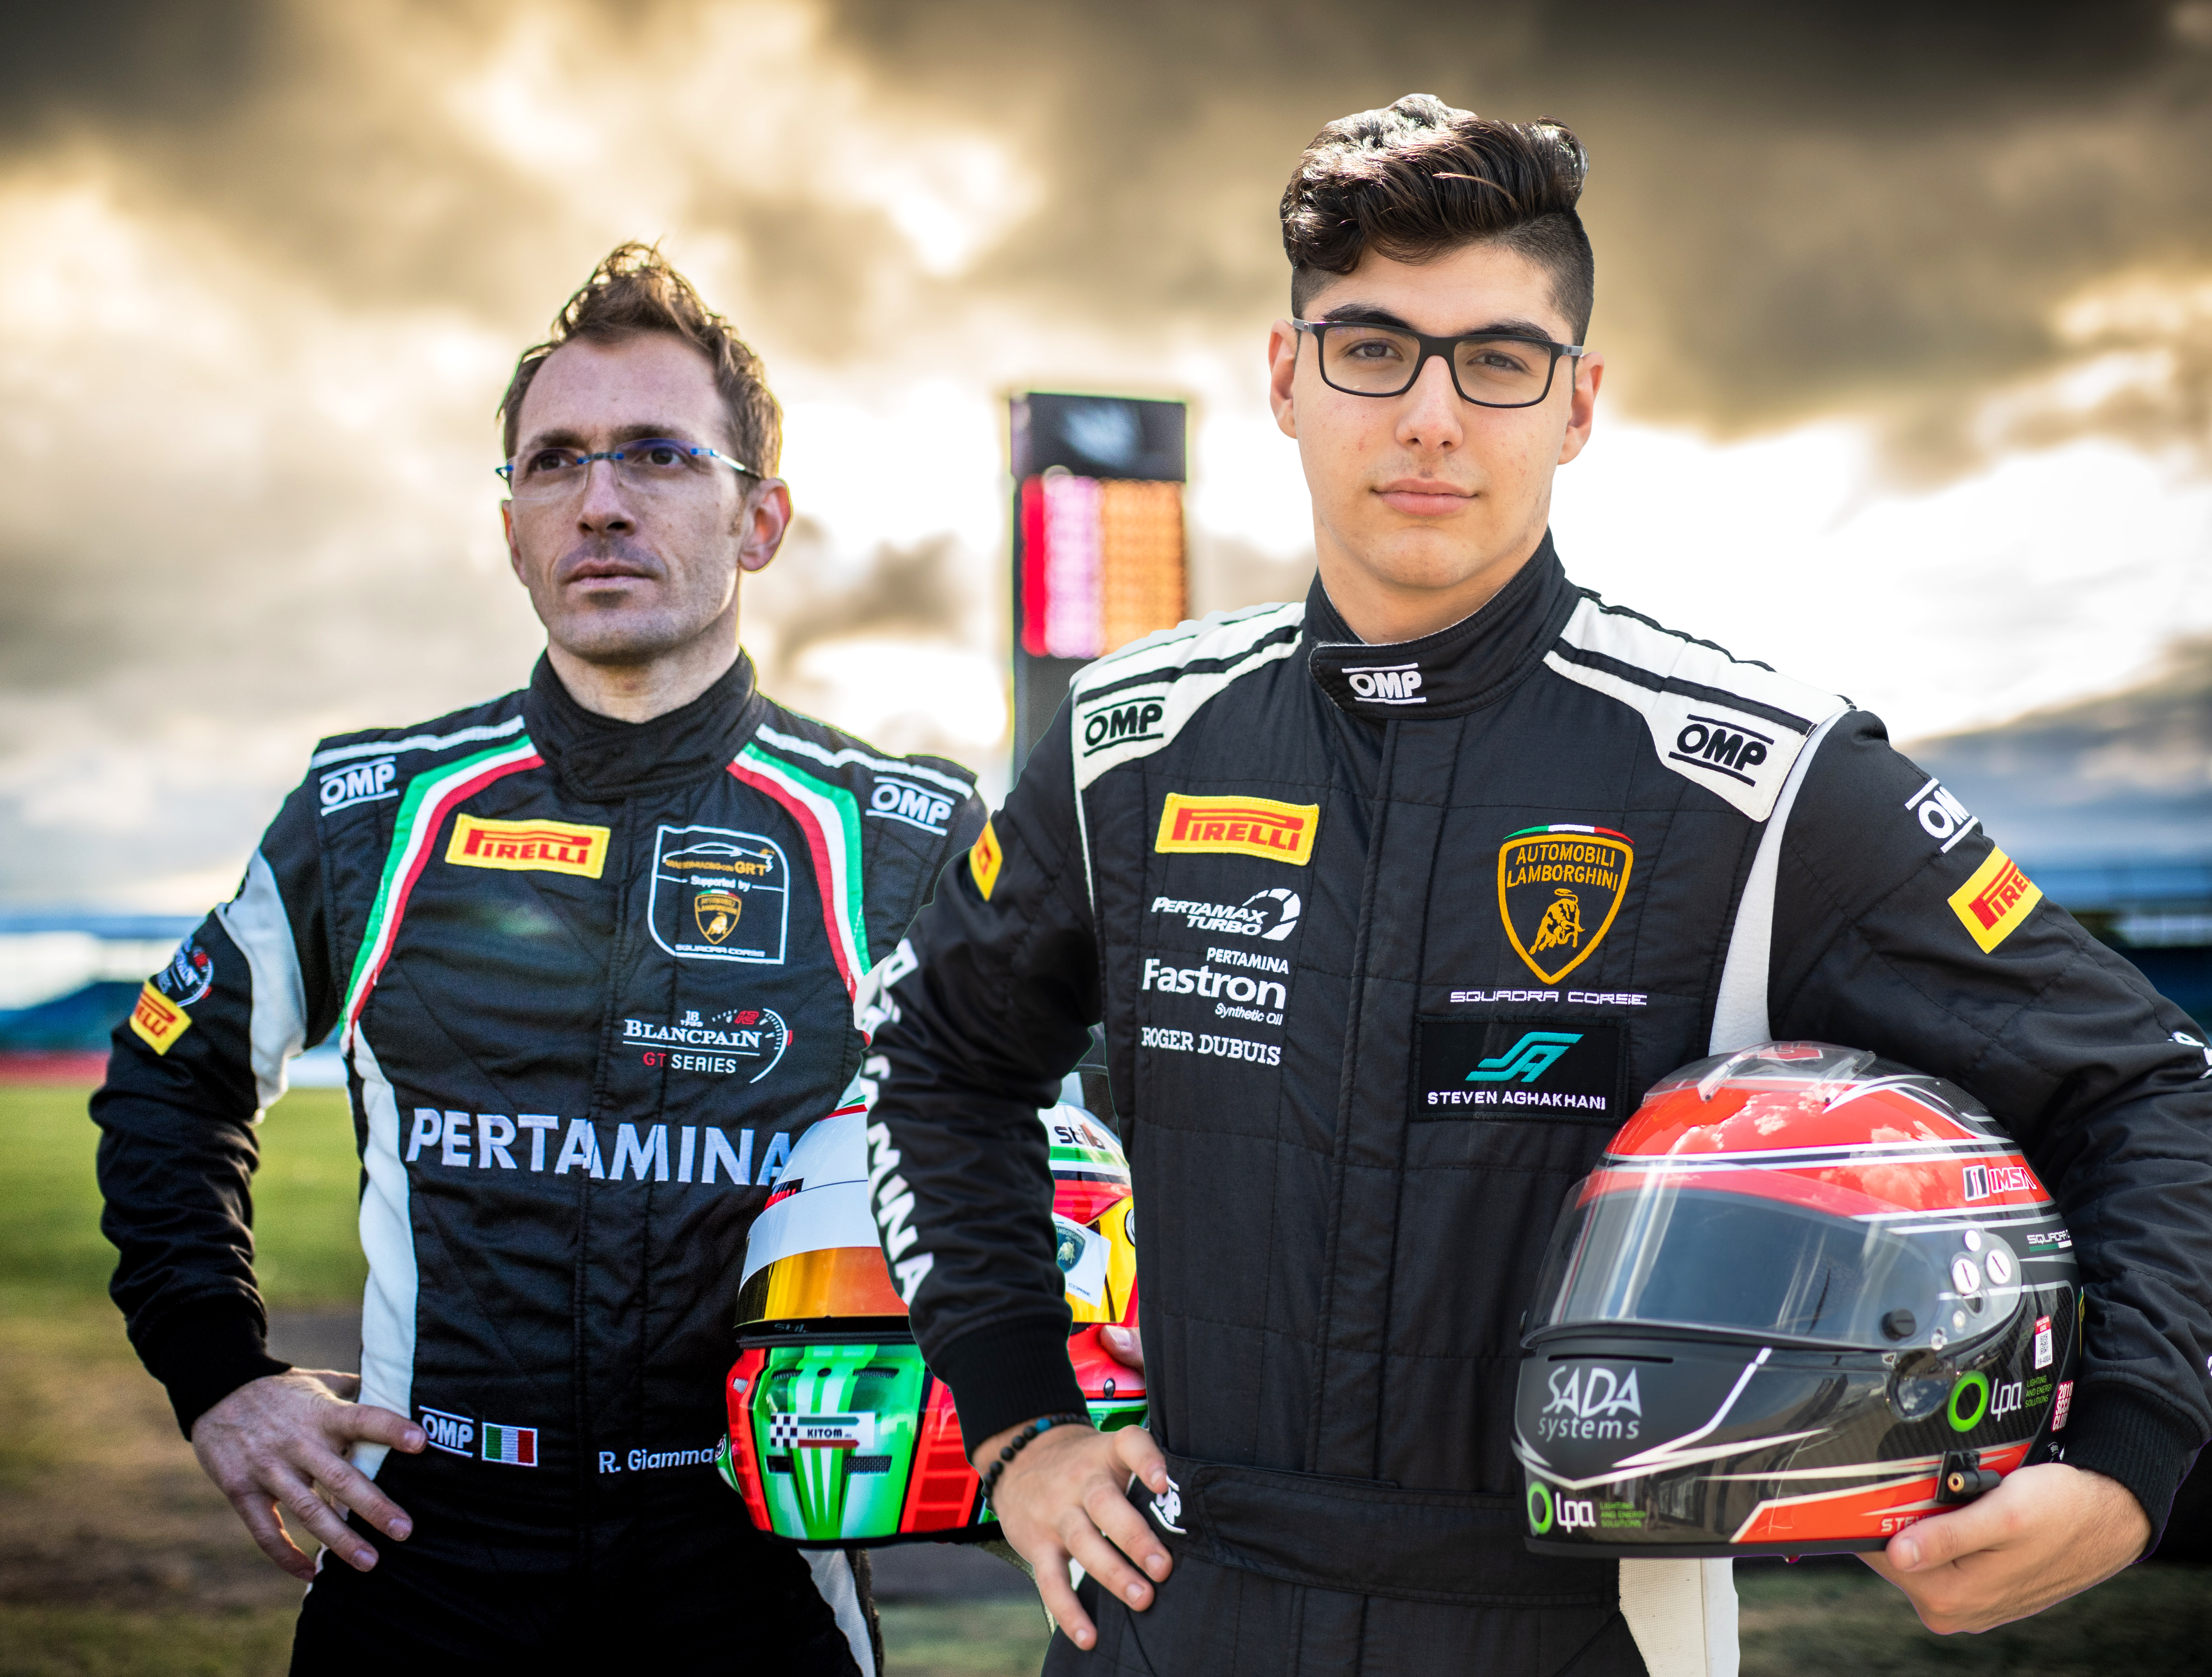 AGHAKHANI COMMITS TO ITALIAN GT ENDURANCE WITH VSR